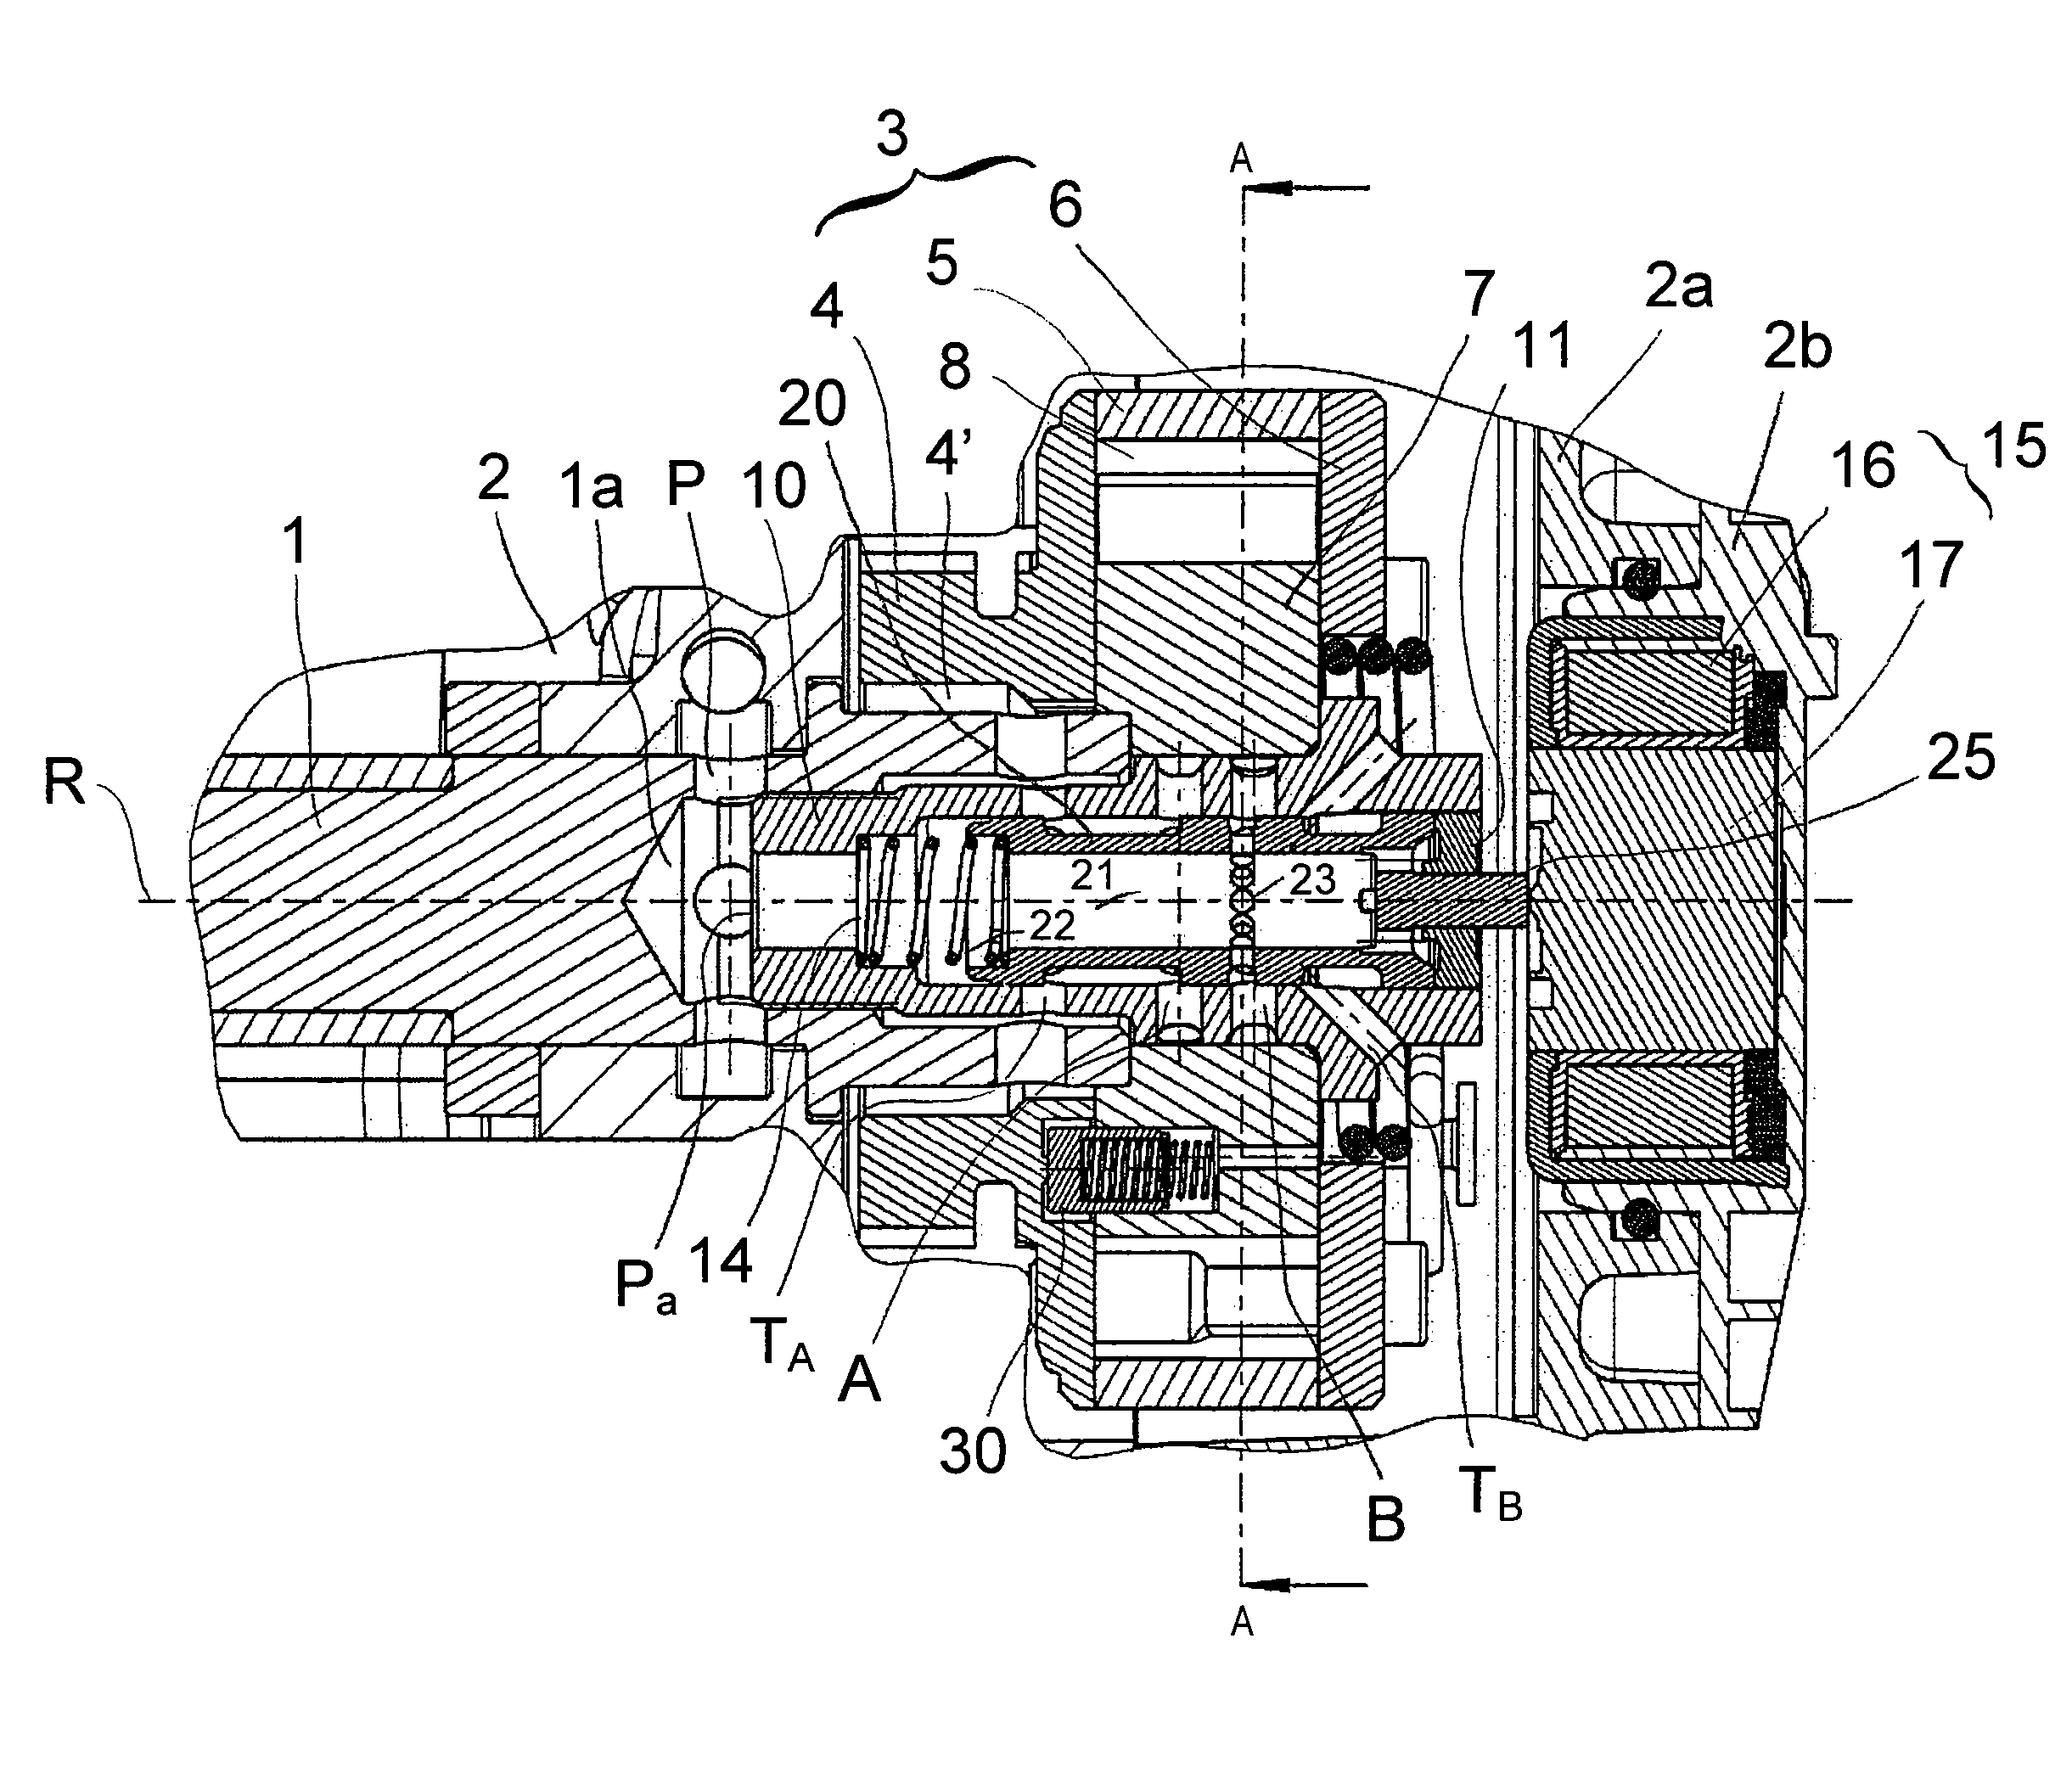 Cam shaft phase setter comprising a control valve for hydraulically adjusting the phase position of a cam shaft